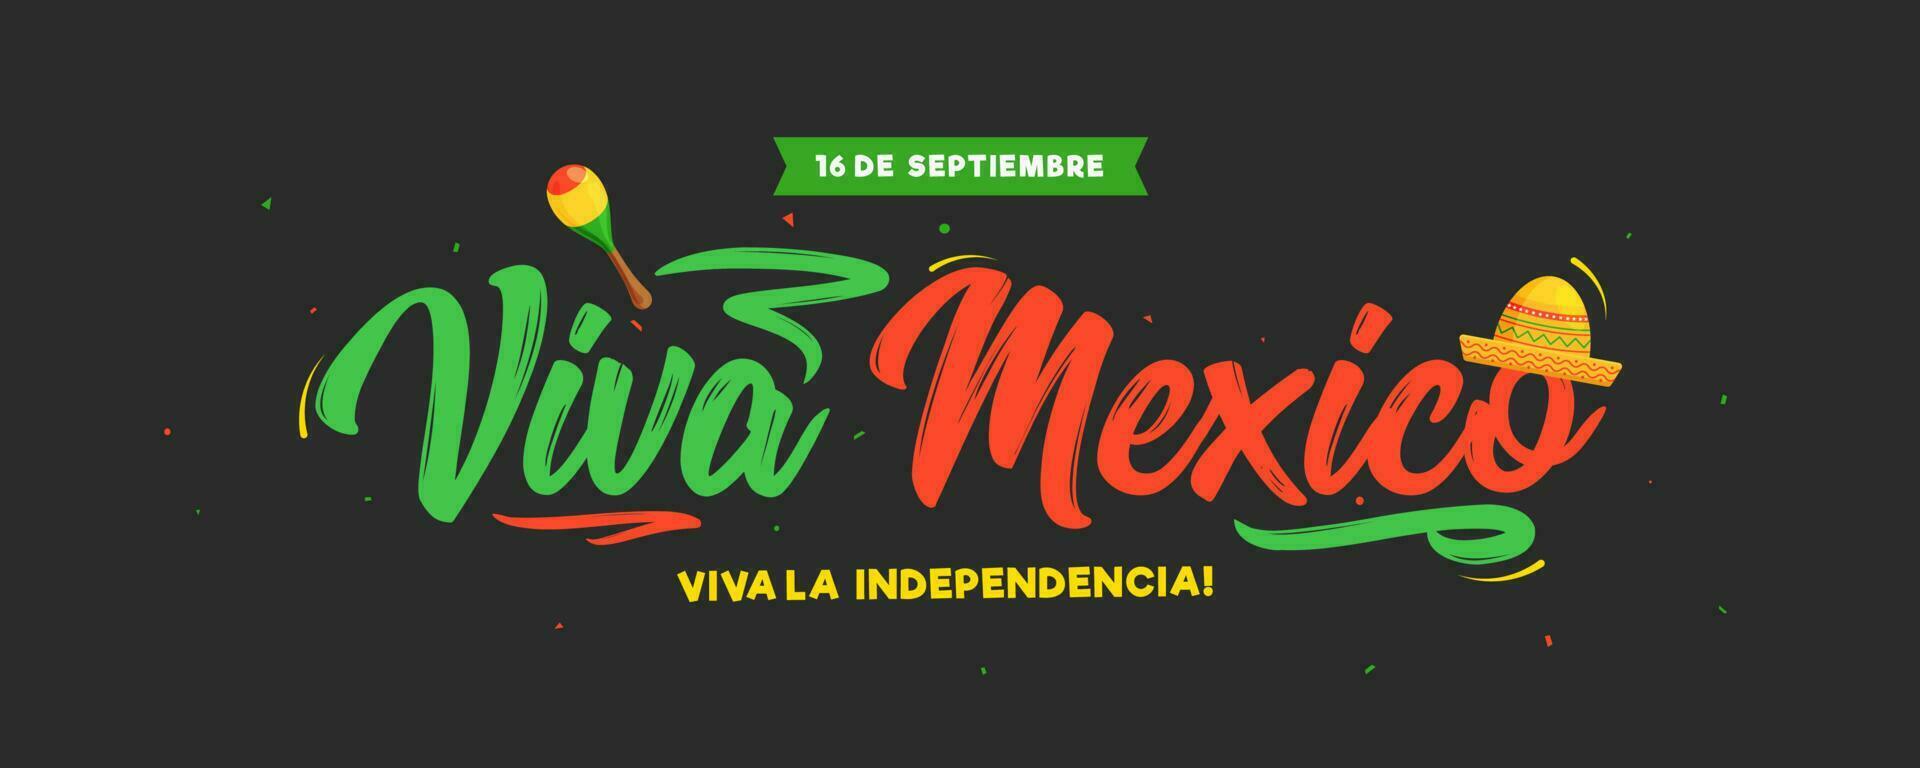 16 September Viva Mexico Independence Day text in spanish language with sombrero hat and maracas illustration on black background. Can be used as header or banner design. vector